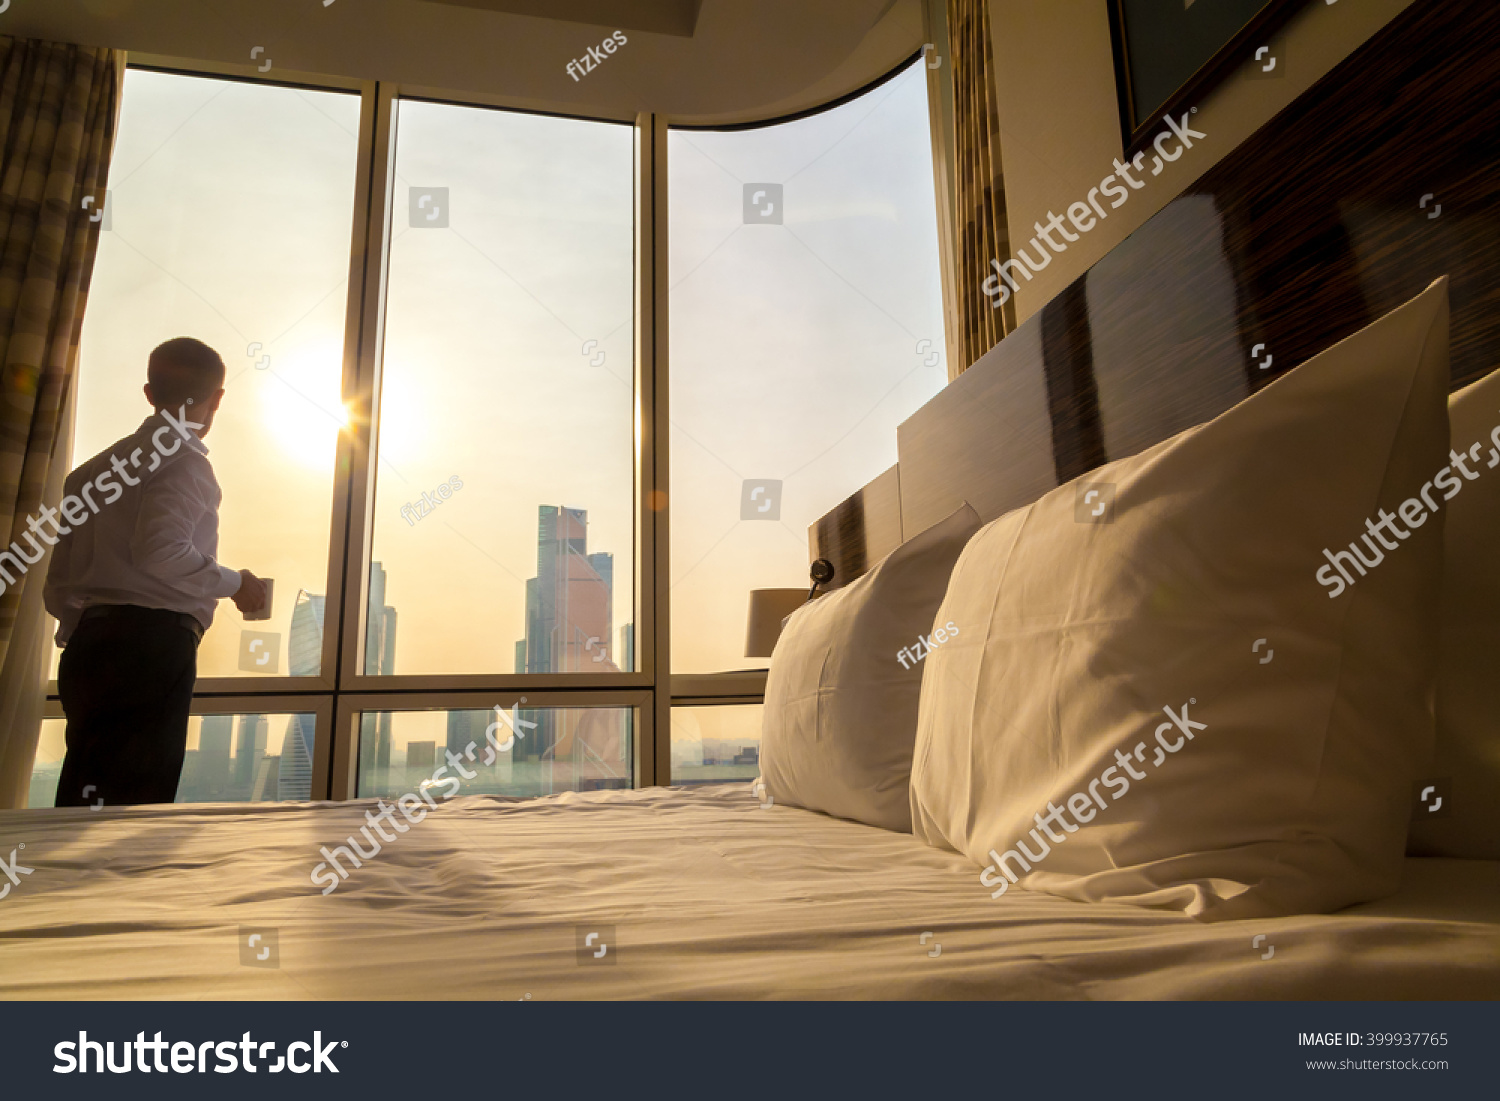 Bed maid-up with white pillows and bed sheets in cozy room. Young businessman with cup of coffee standing at window looking at city scenery on the background. Focus on cushion. Motivation concept #399937765